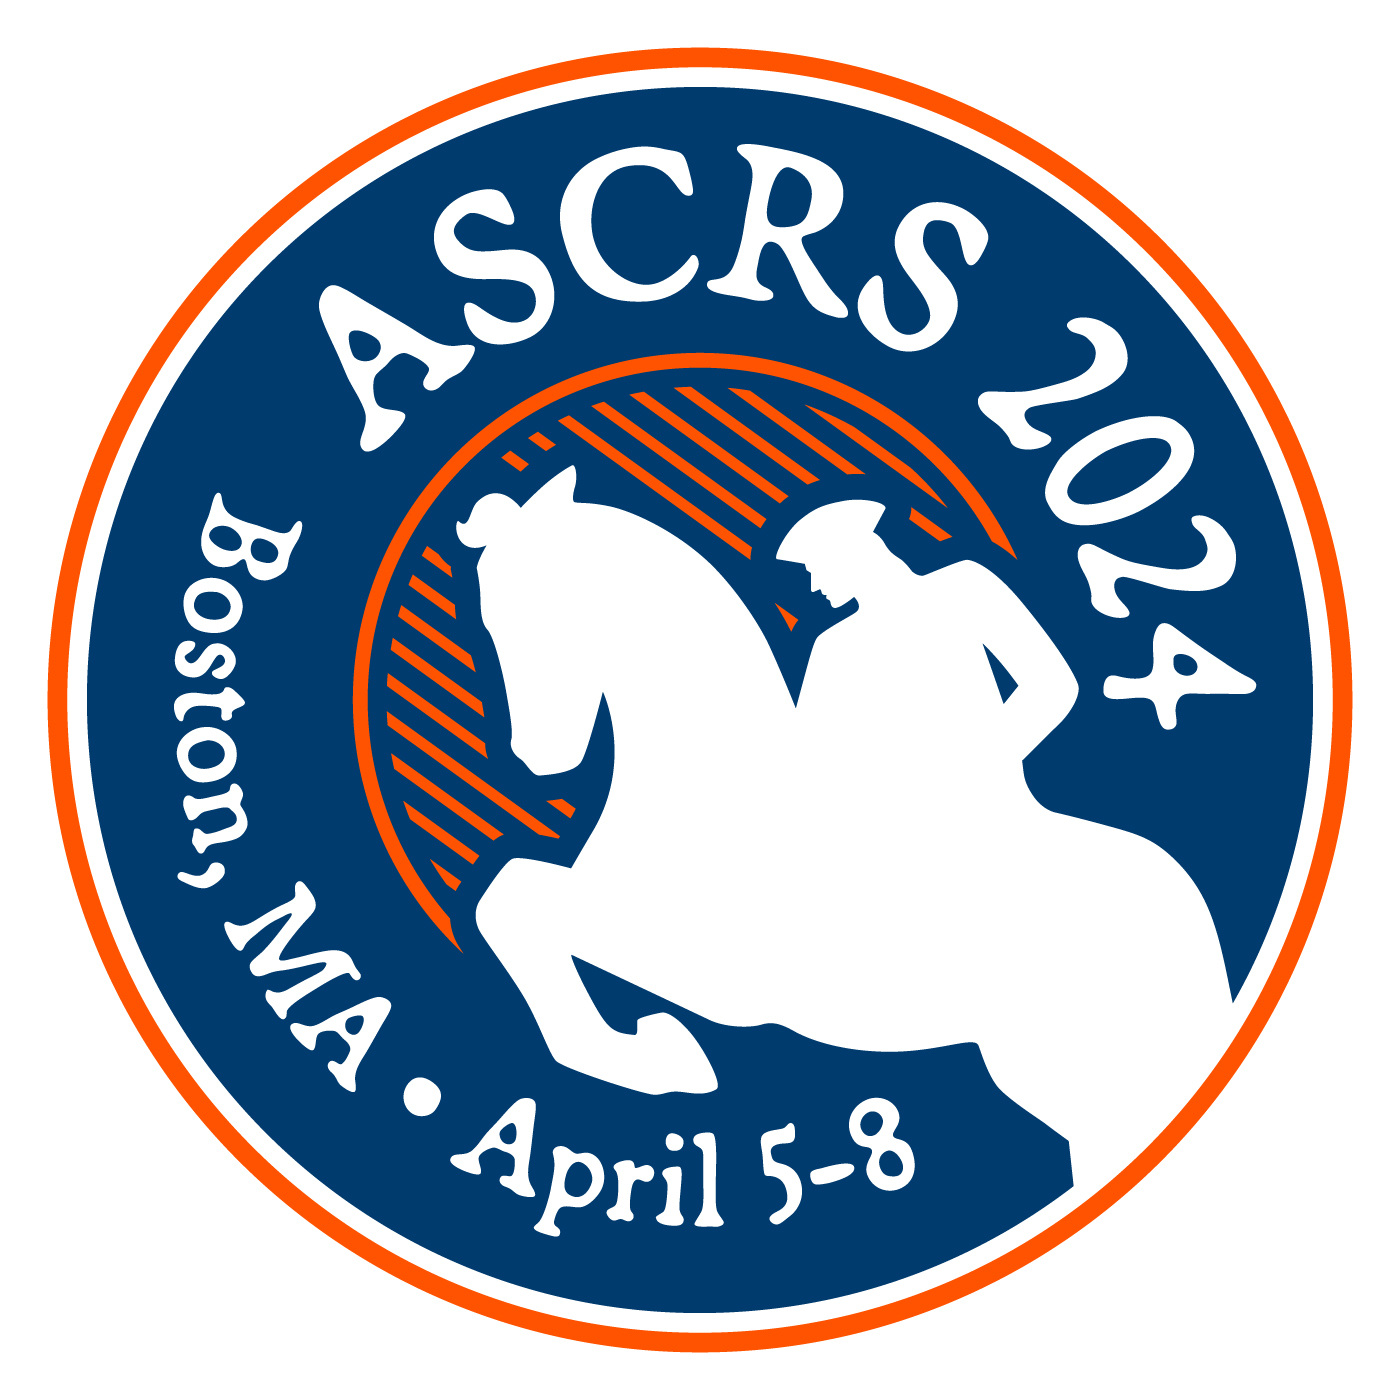 Next Year ASCRS